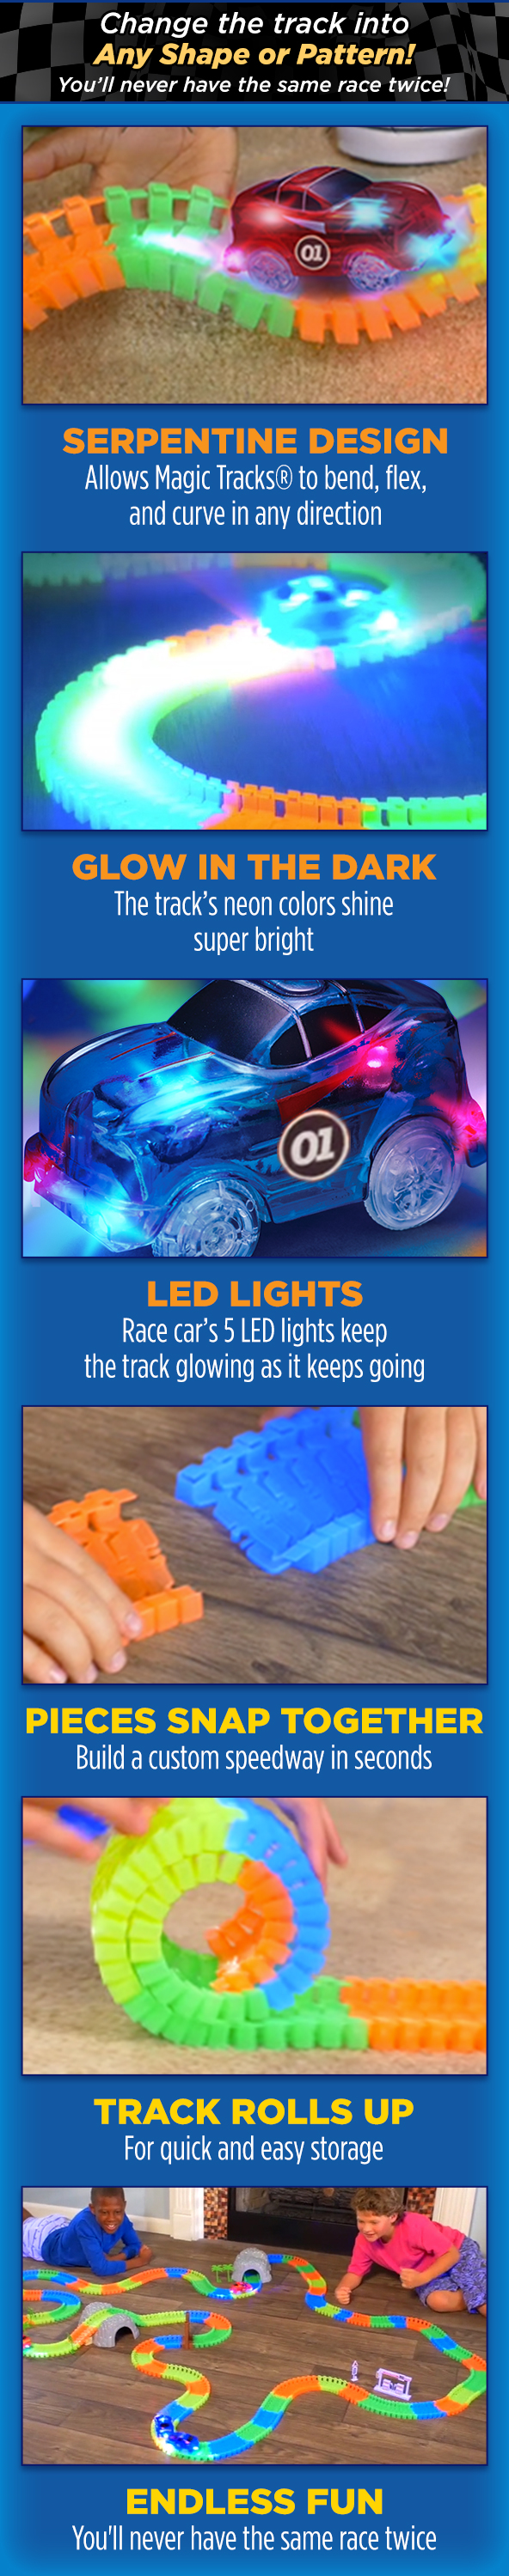 Cars for Magic Tracks Glow in the Dark Amazing Racetrack Light Up Car Race New!